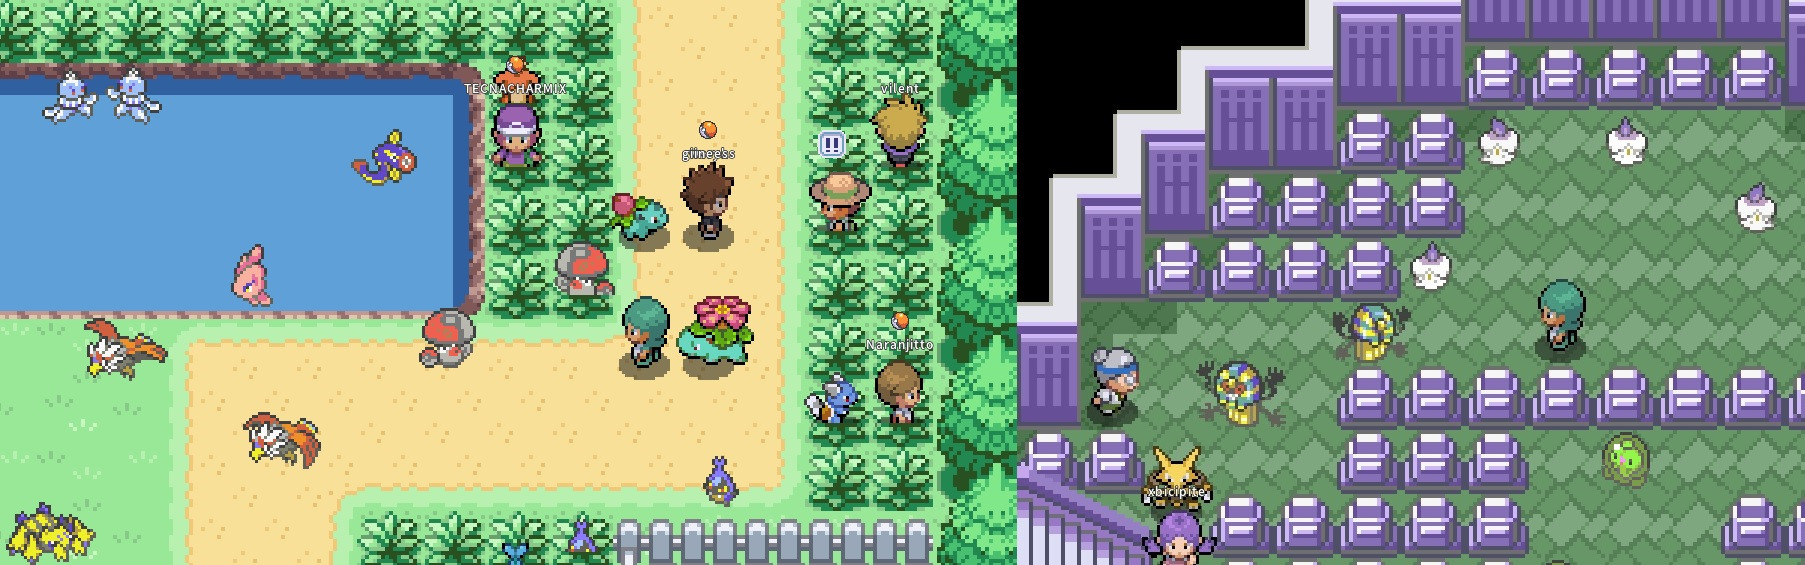 I really need help with the start menu ): - General Discussion - PokeMMO